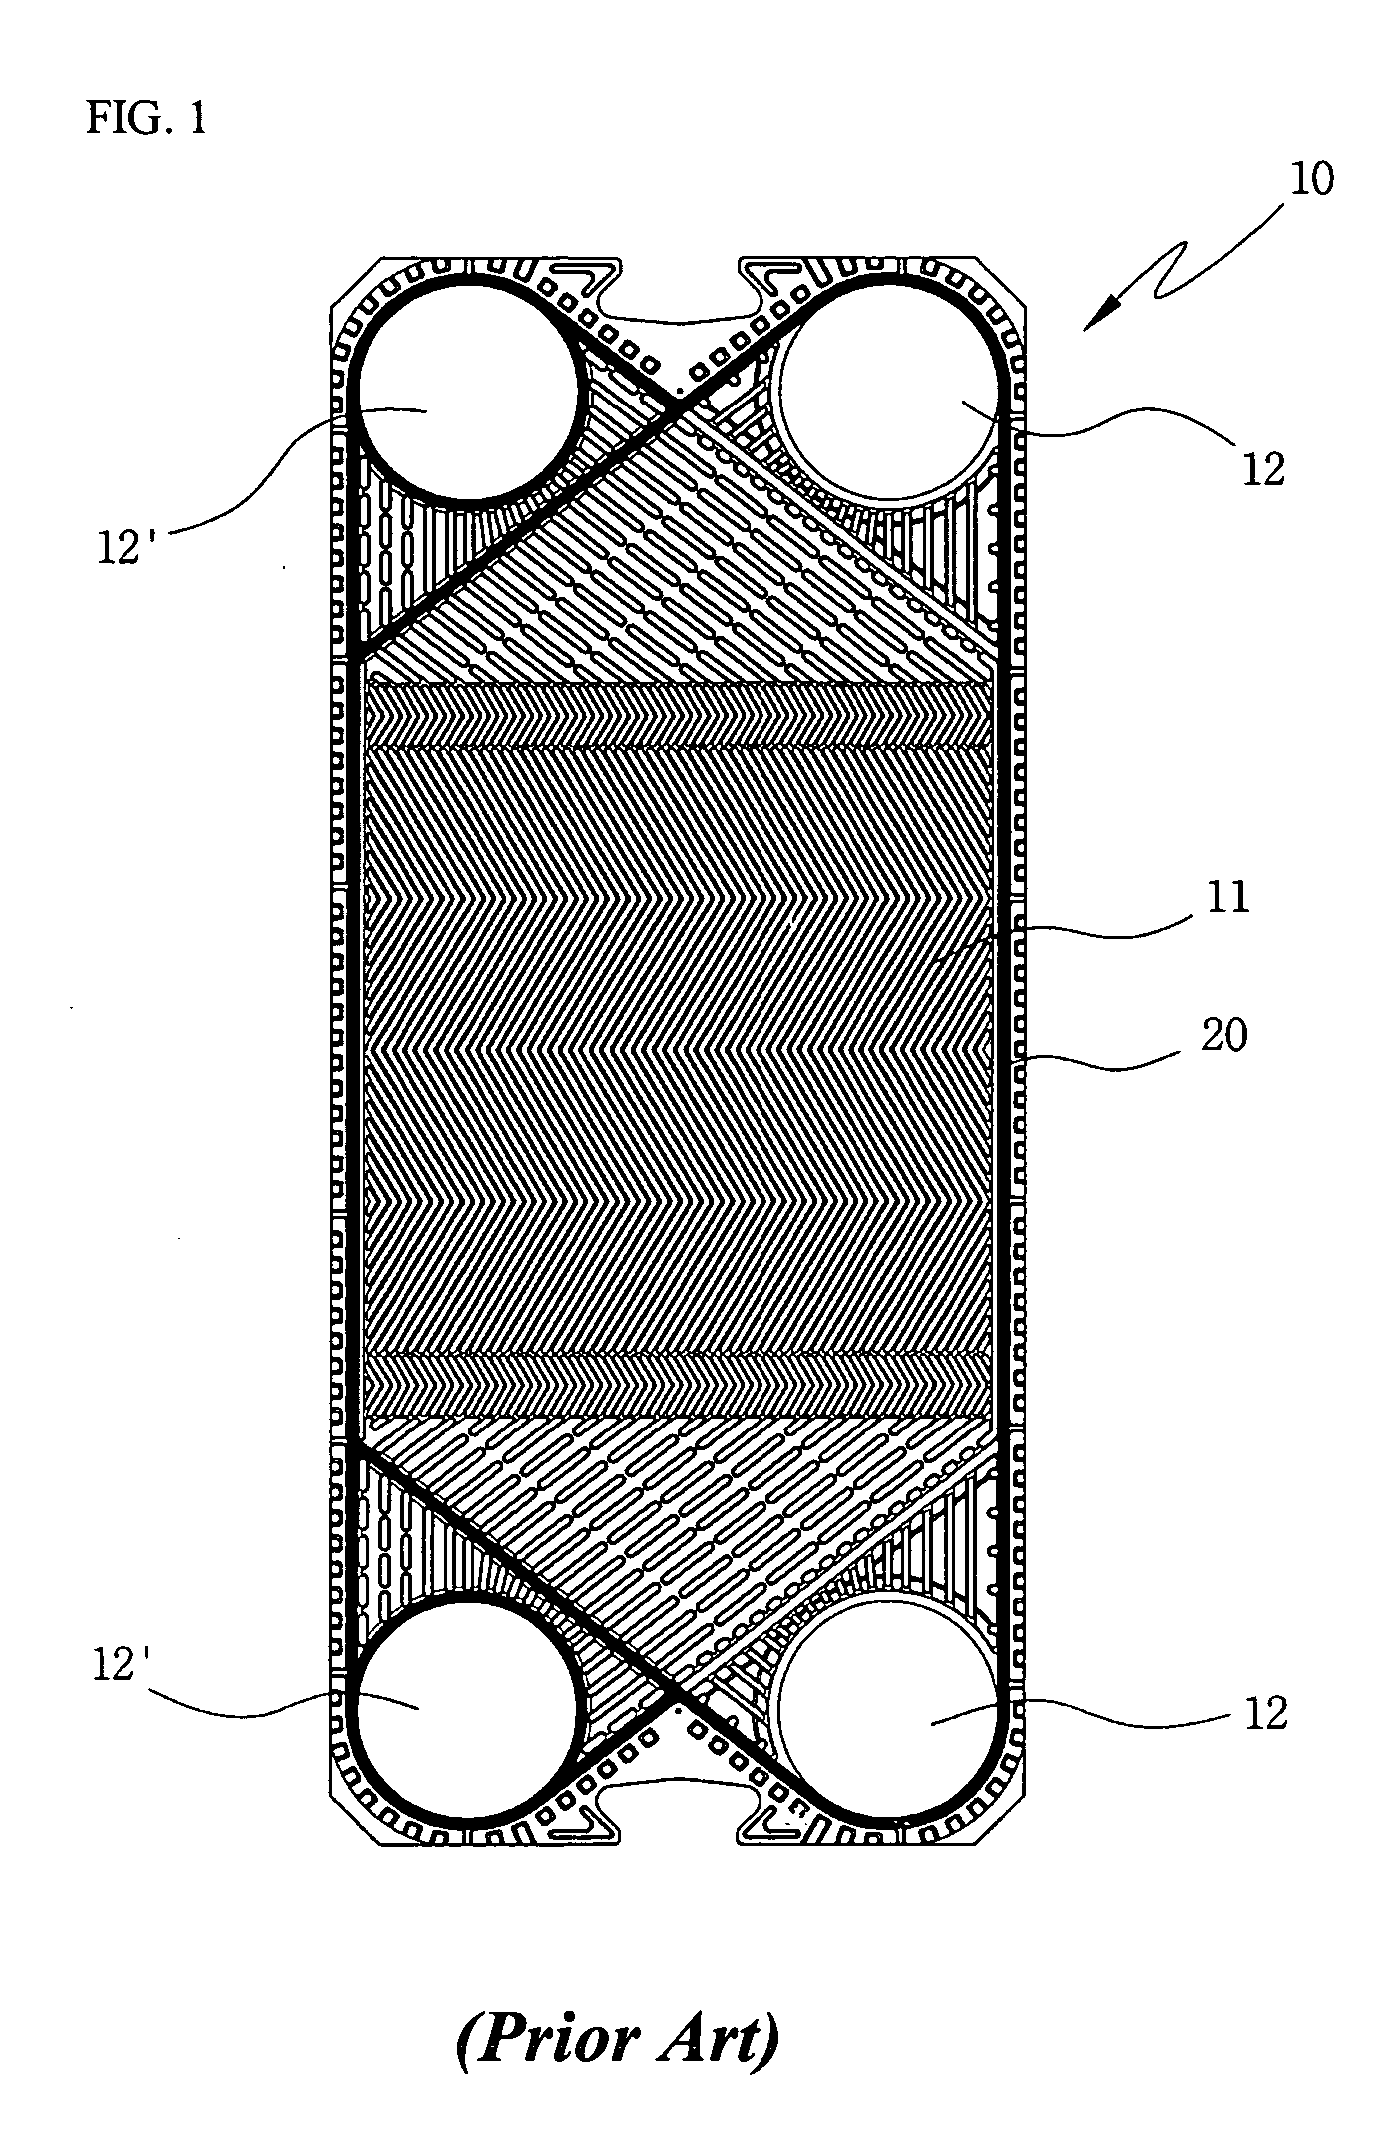 Coupling structure of heat transfer plate and gasket of plate type heat exchanger